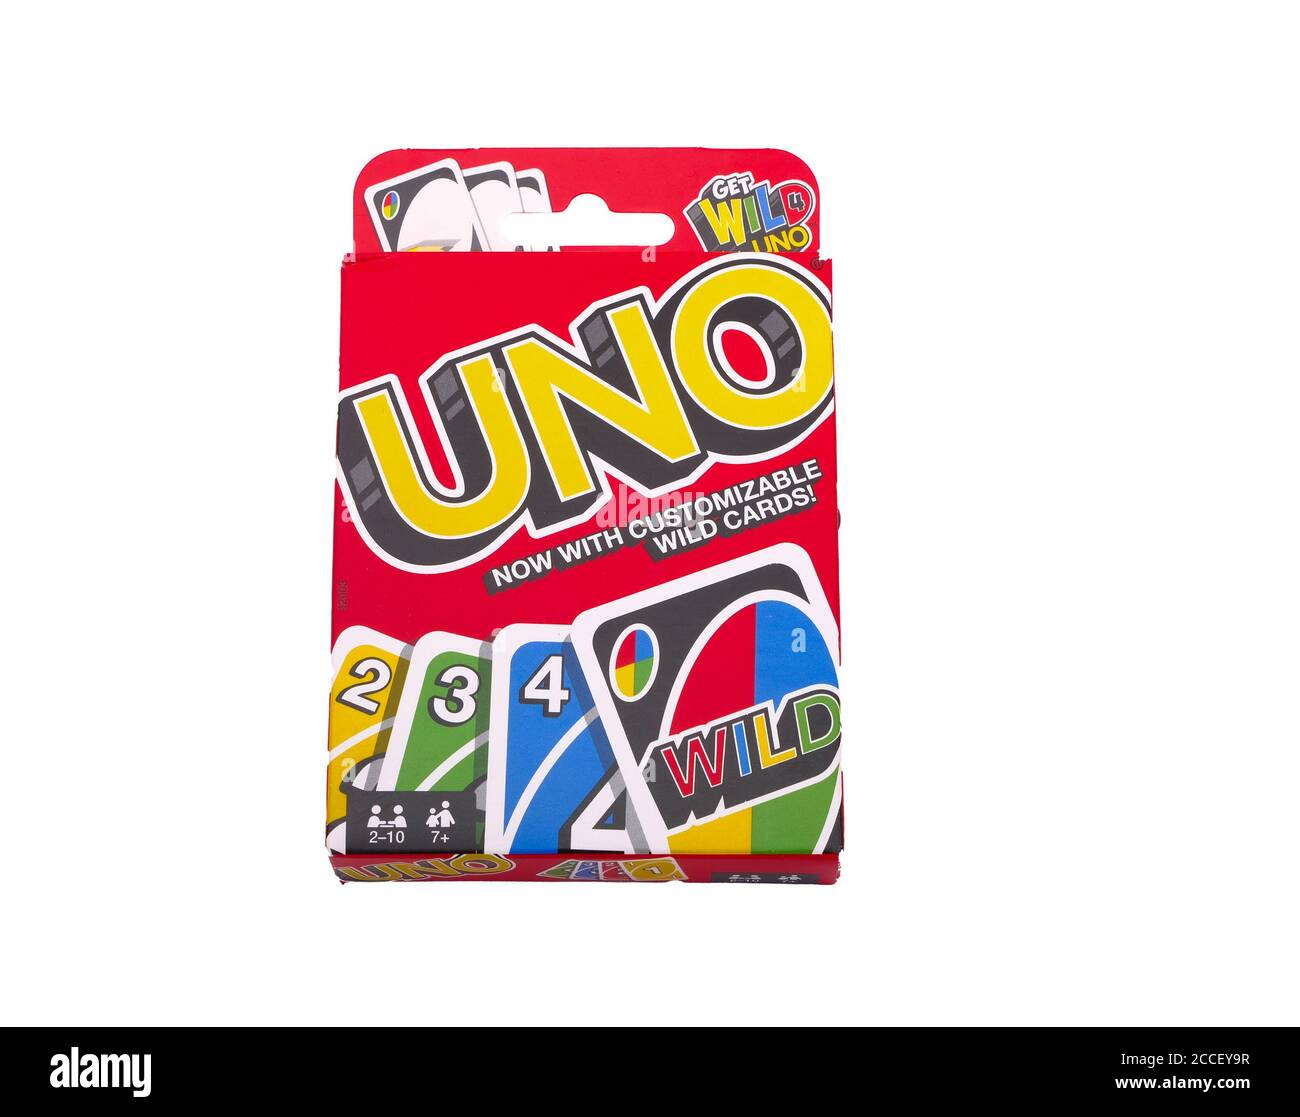 Custom Uno Reverse Cards  Playing cards art, Uno cards, Painting art  projects